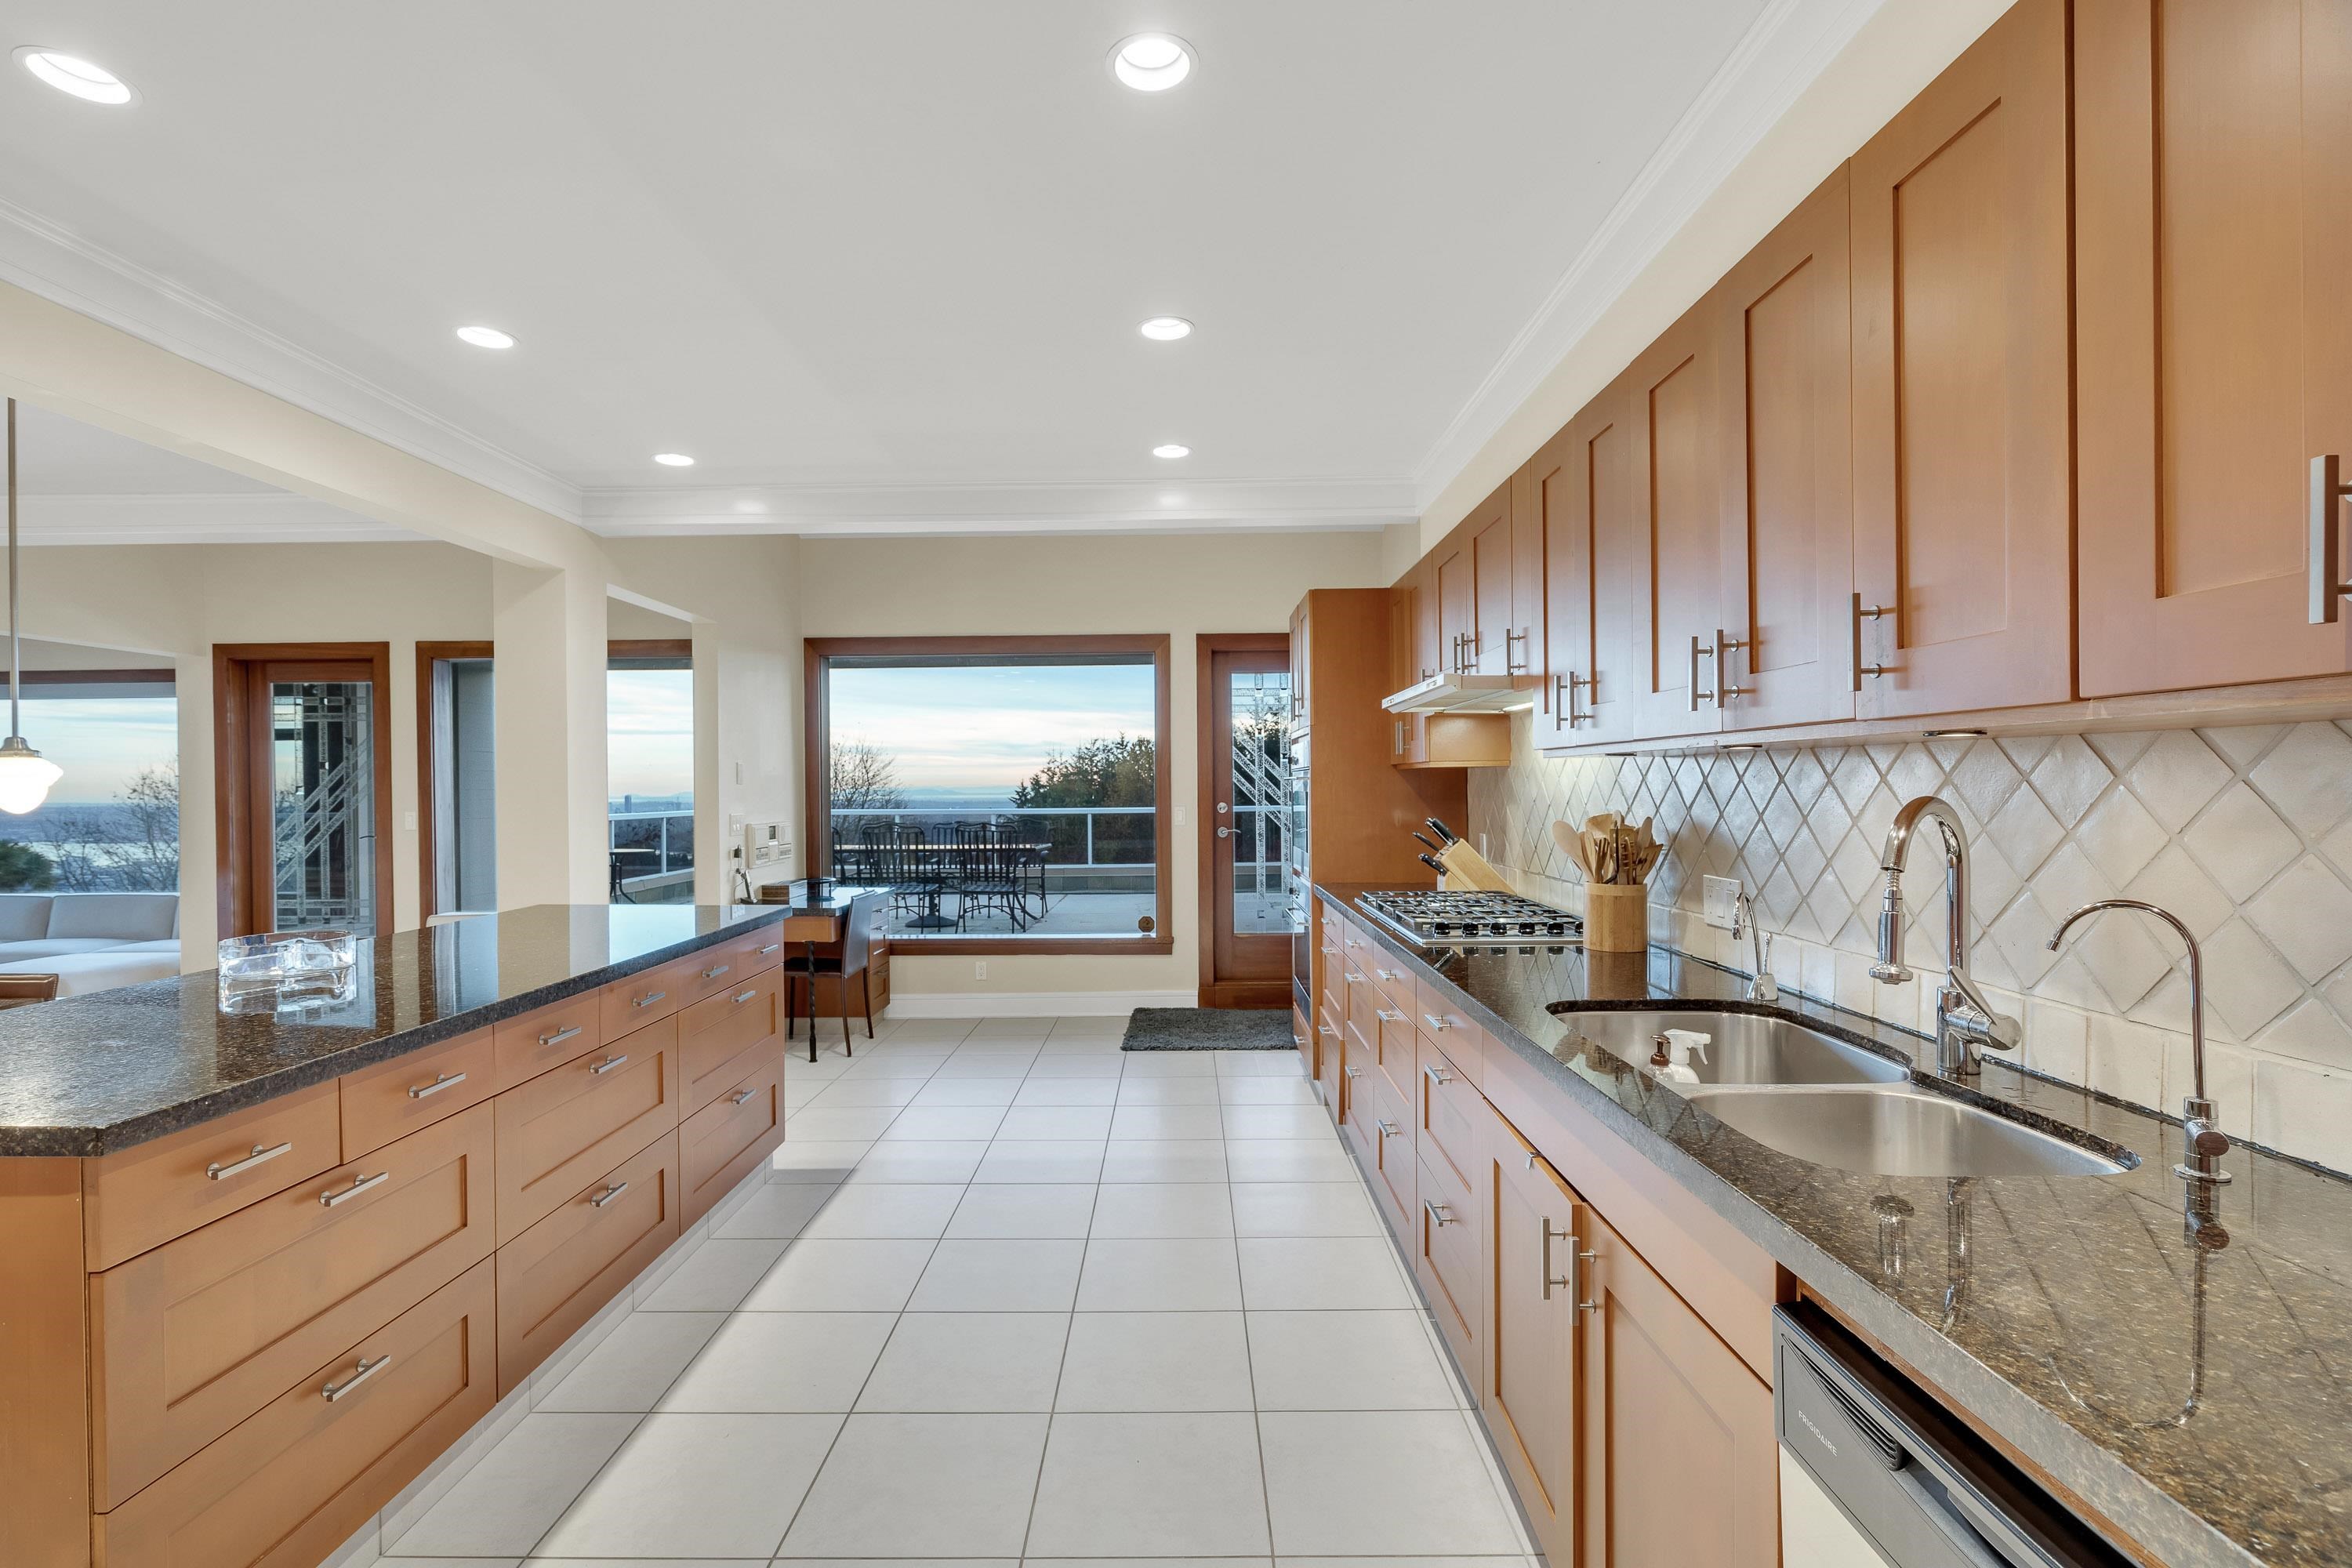 Listing image of 1035 KING GEORGES WAY